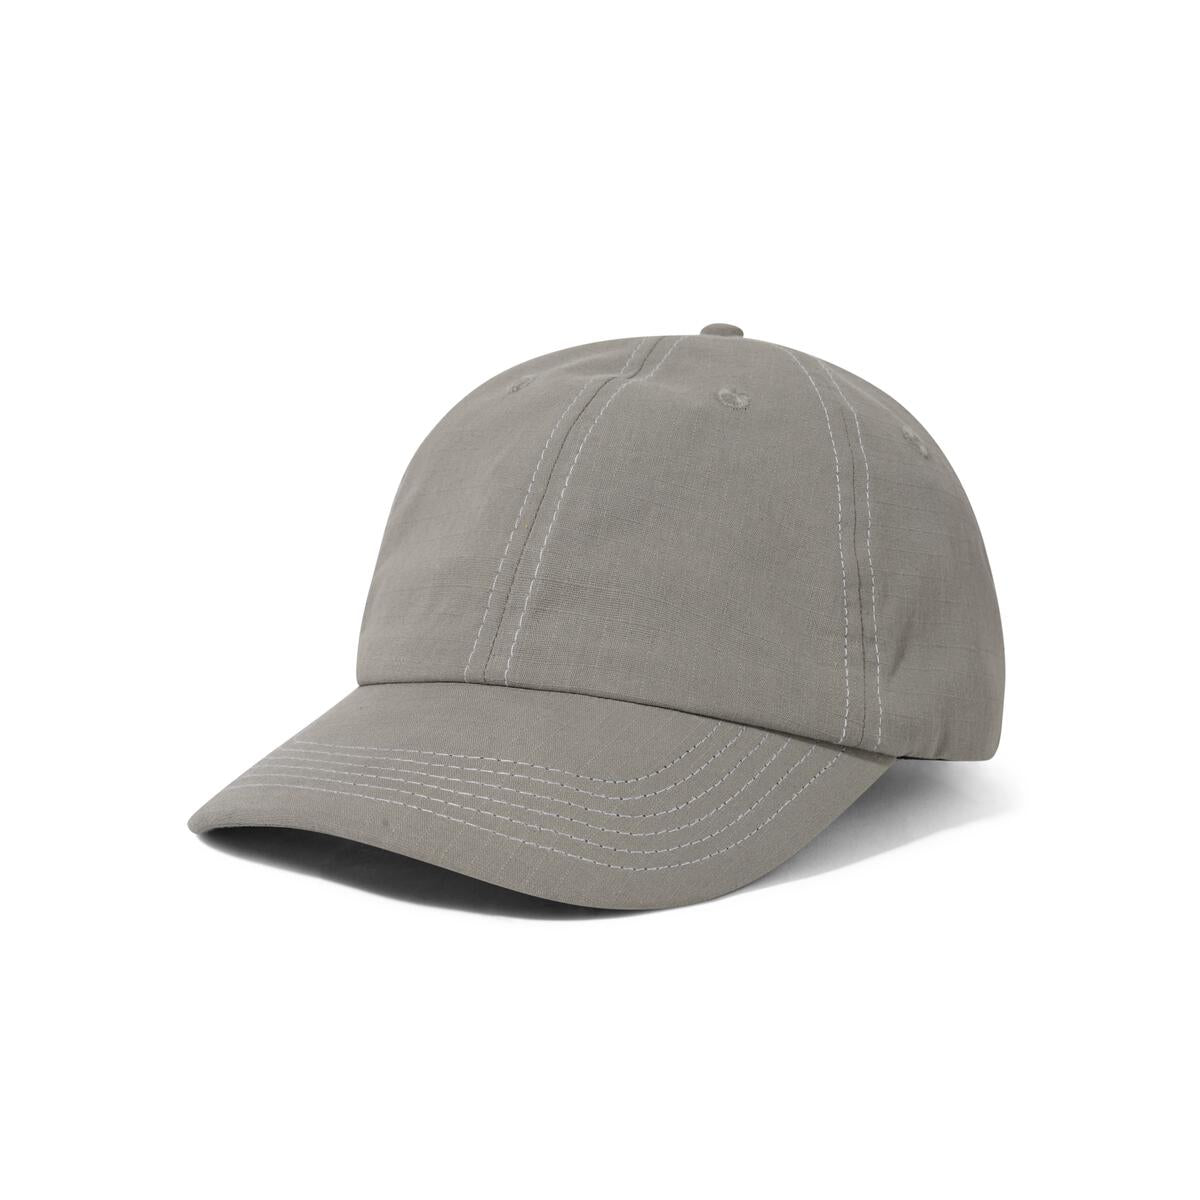 Butter Goods Washed Ripstop 6 Panel Cap - Grey